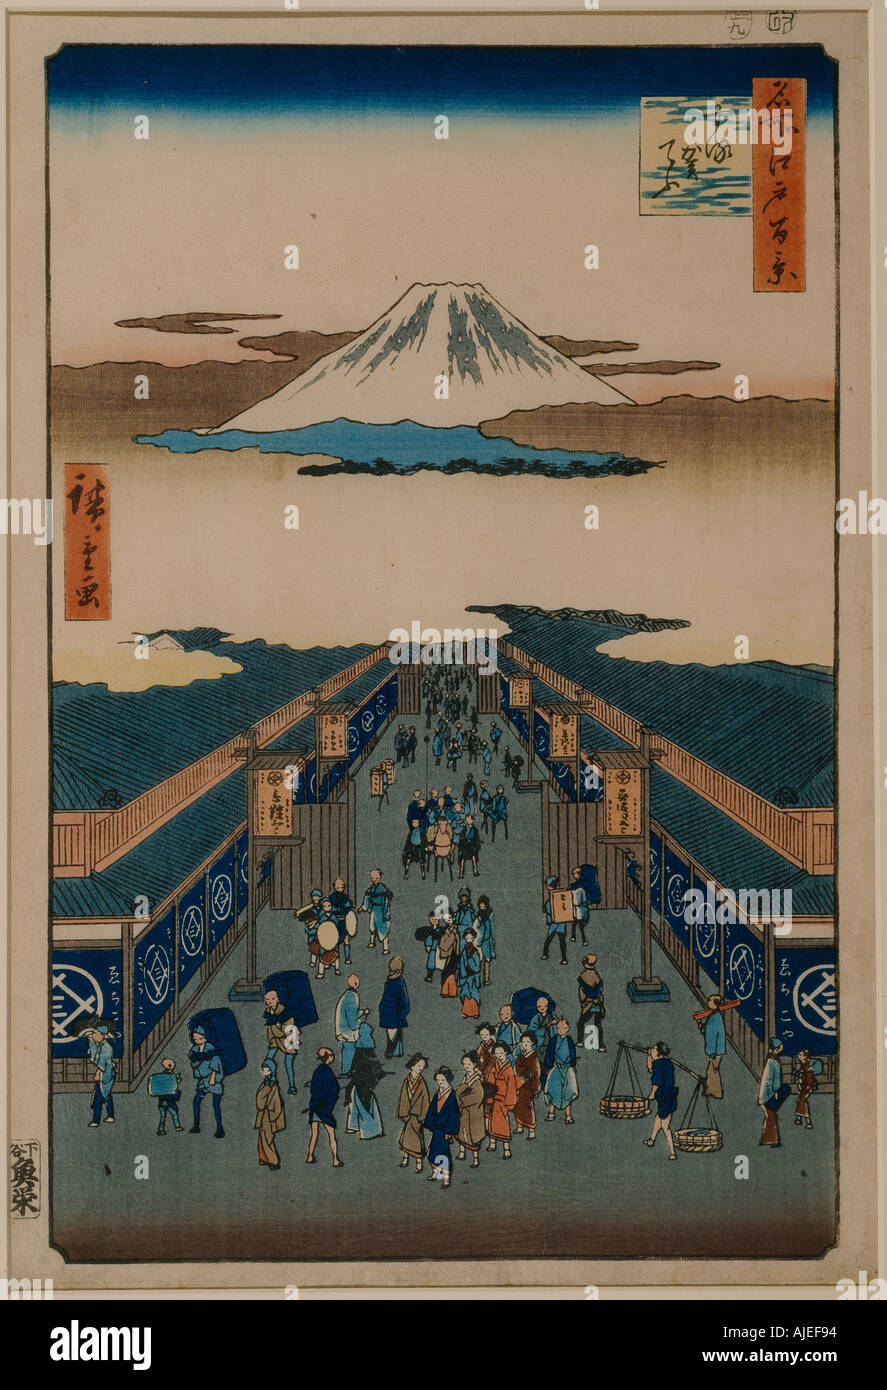 ROAD TO MOUNT FUJI by HIROSHIGE in the Japanese Room at Cragside Northumberland Stock Photo